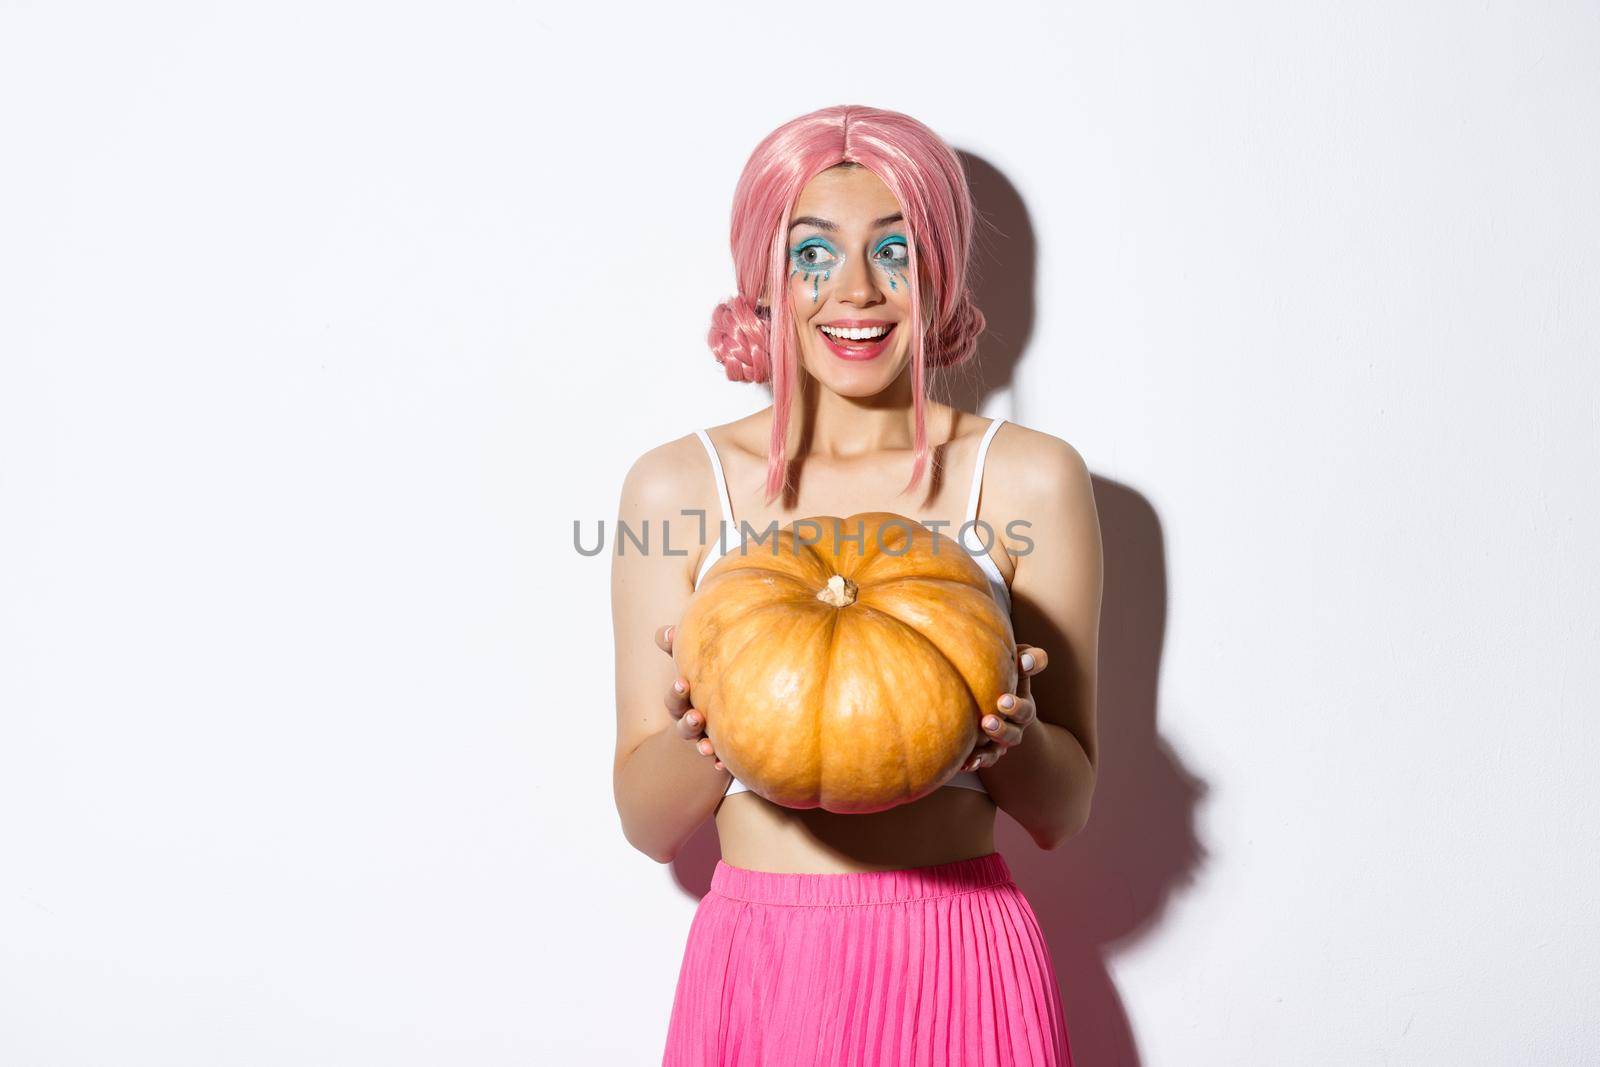 Portrait of attractive girl in pink wig looking amused and smiling, holding pumpkin for halloween party, standing over white background.